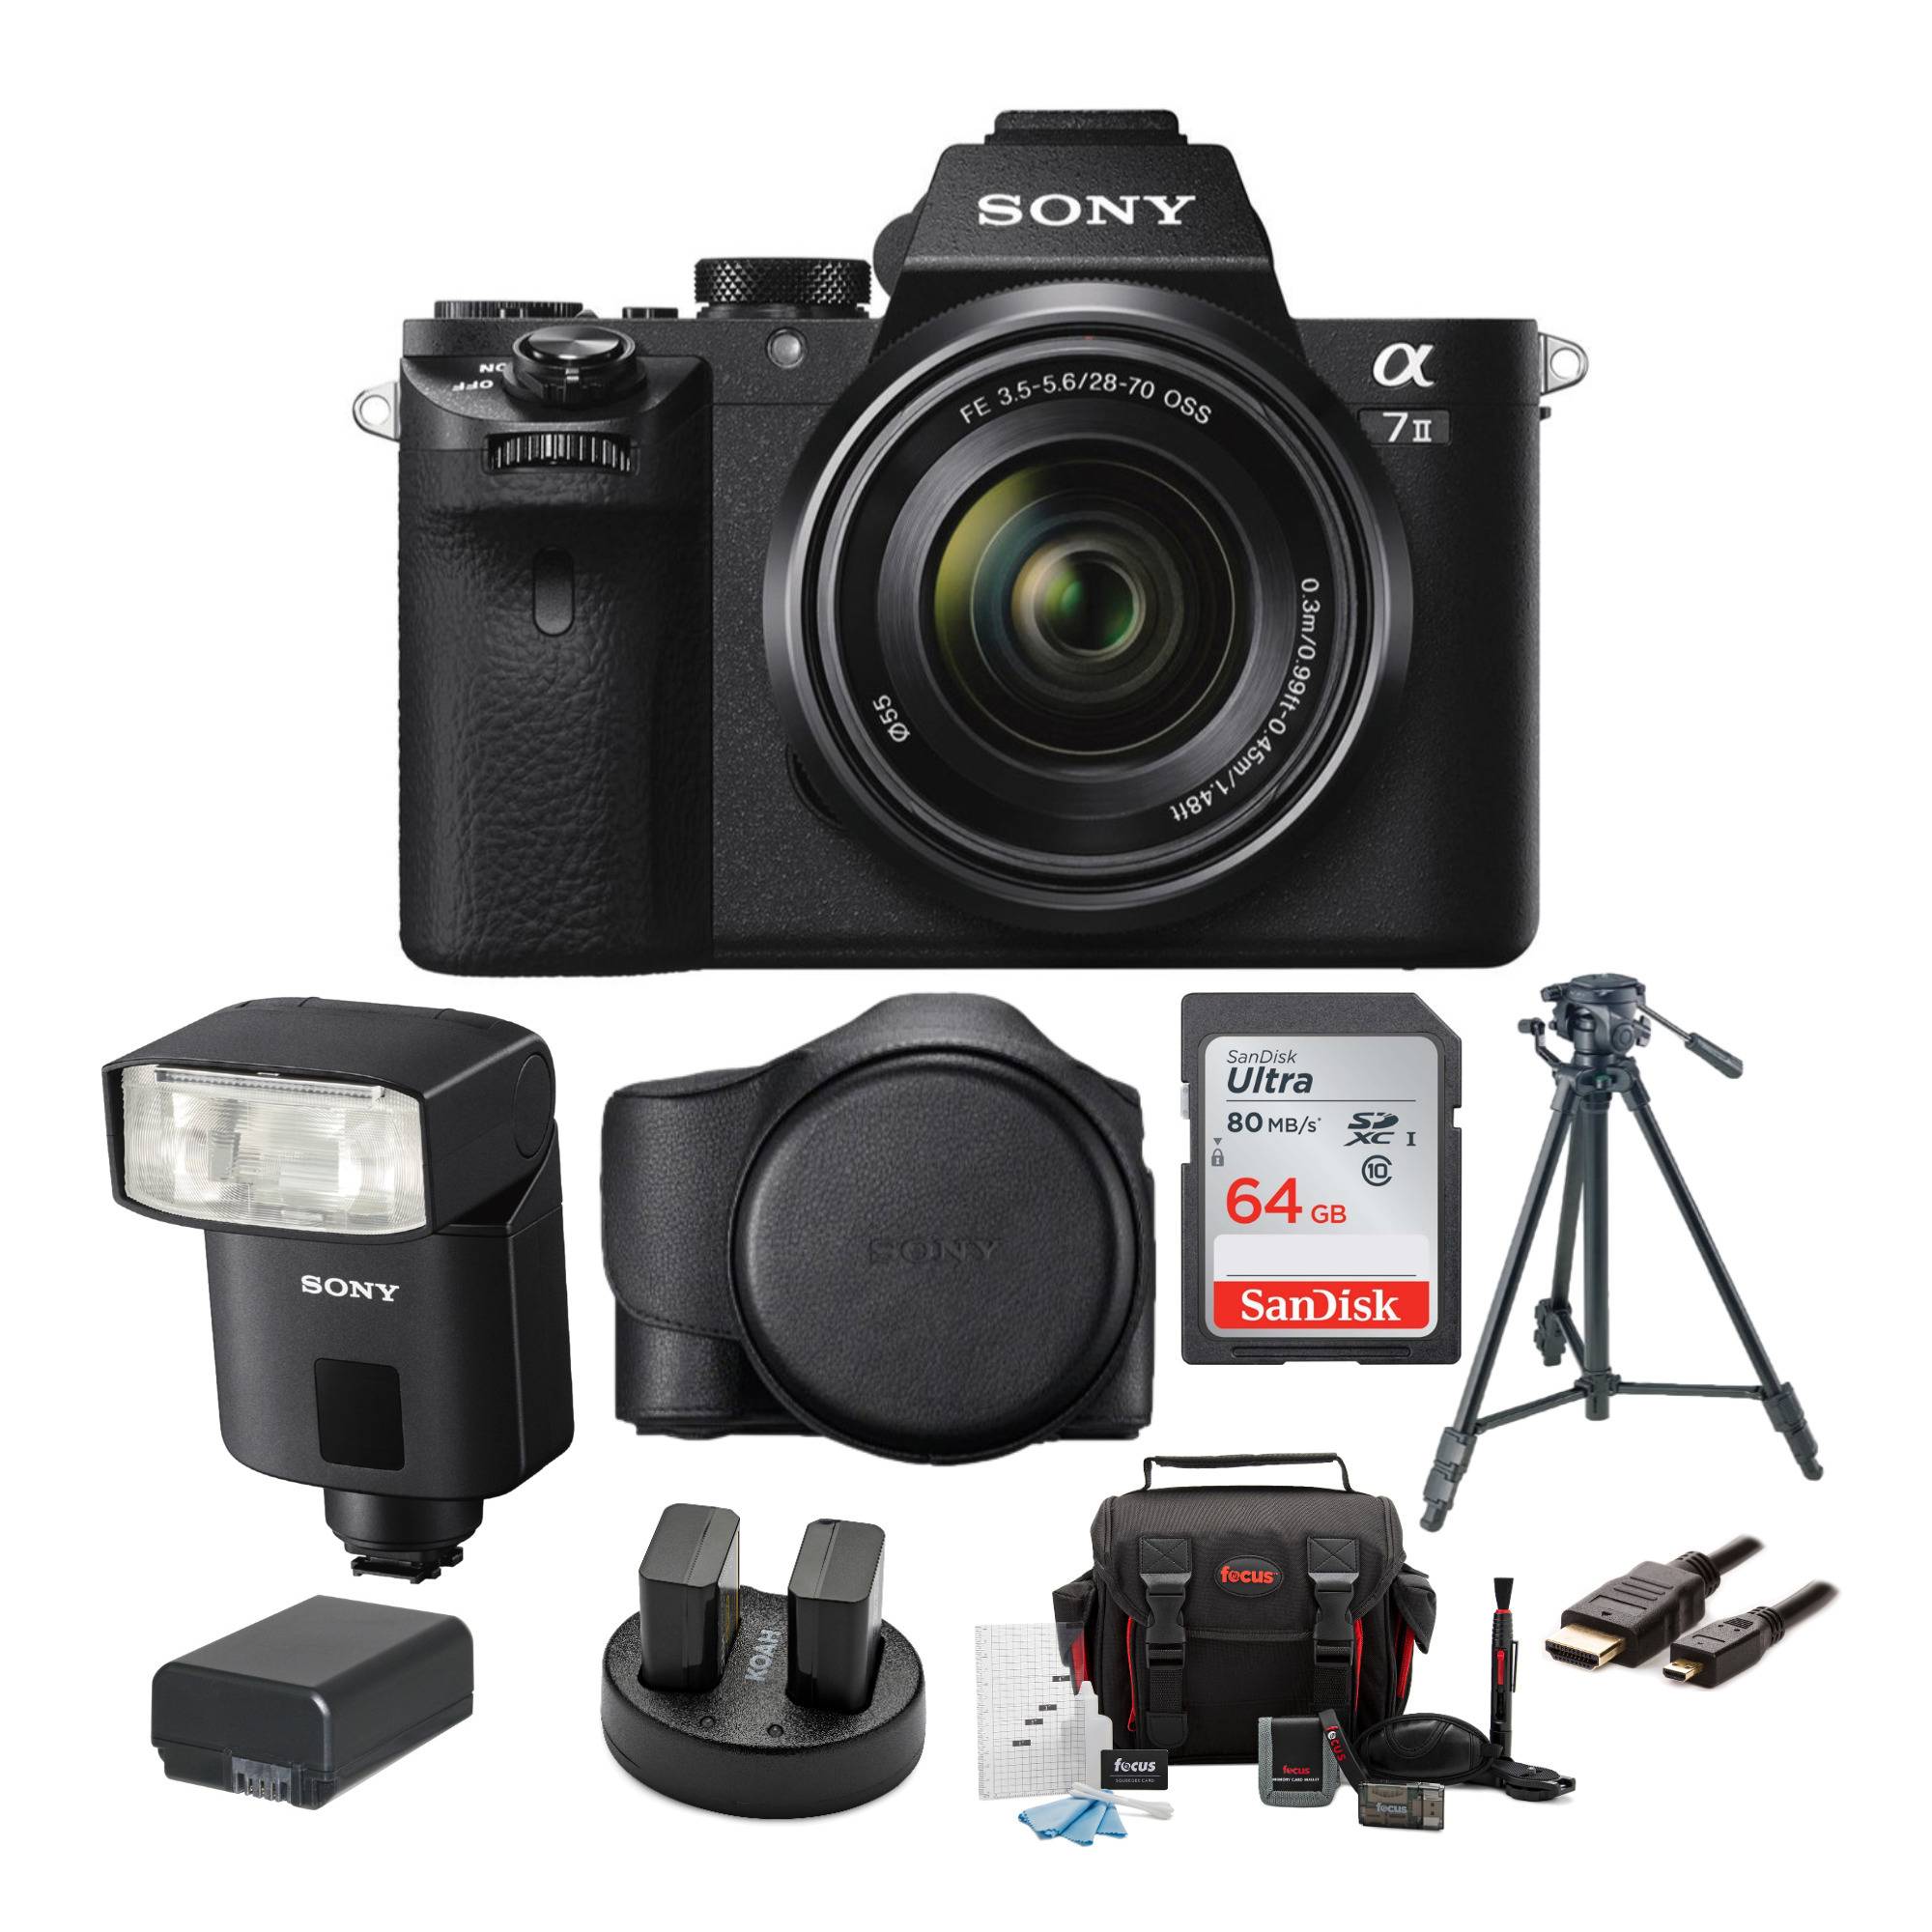 Sony Alpha a7II Mirrorless Digital Camera with 28-70mm f/3.5-5.6 Lens and External Flash Bundle